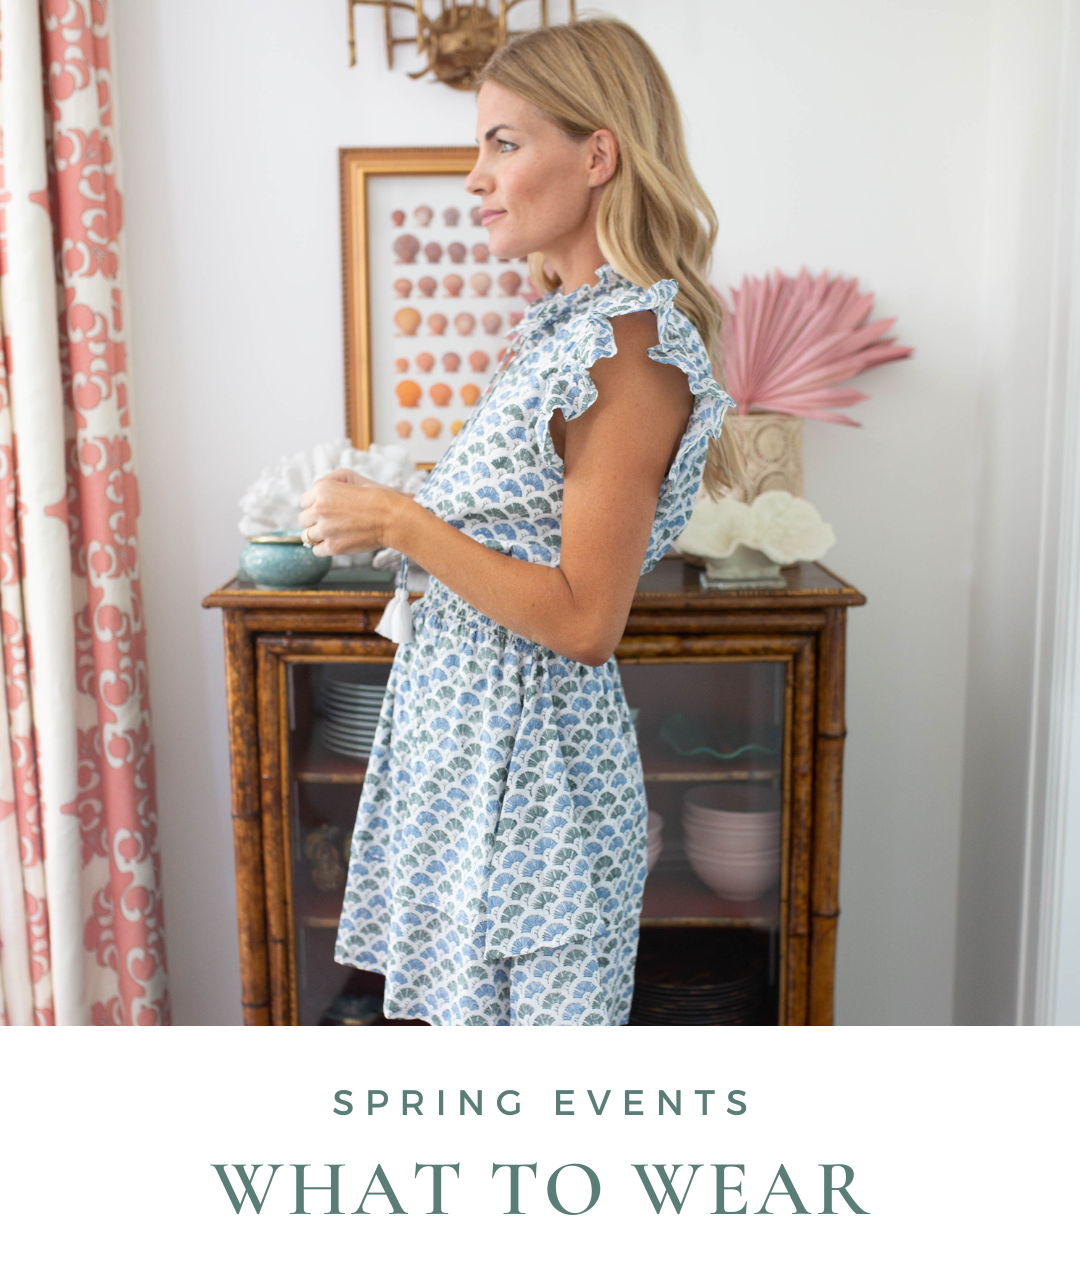 What To Wear - Spring Events – Marea by Liz Joy